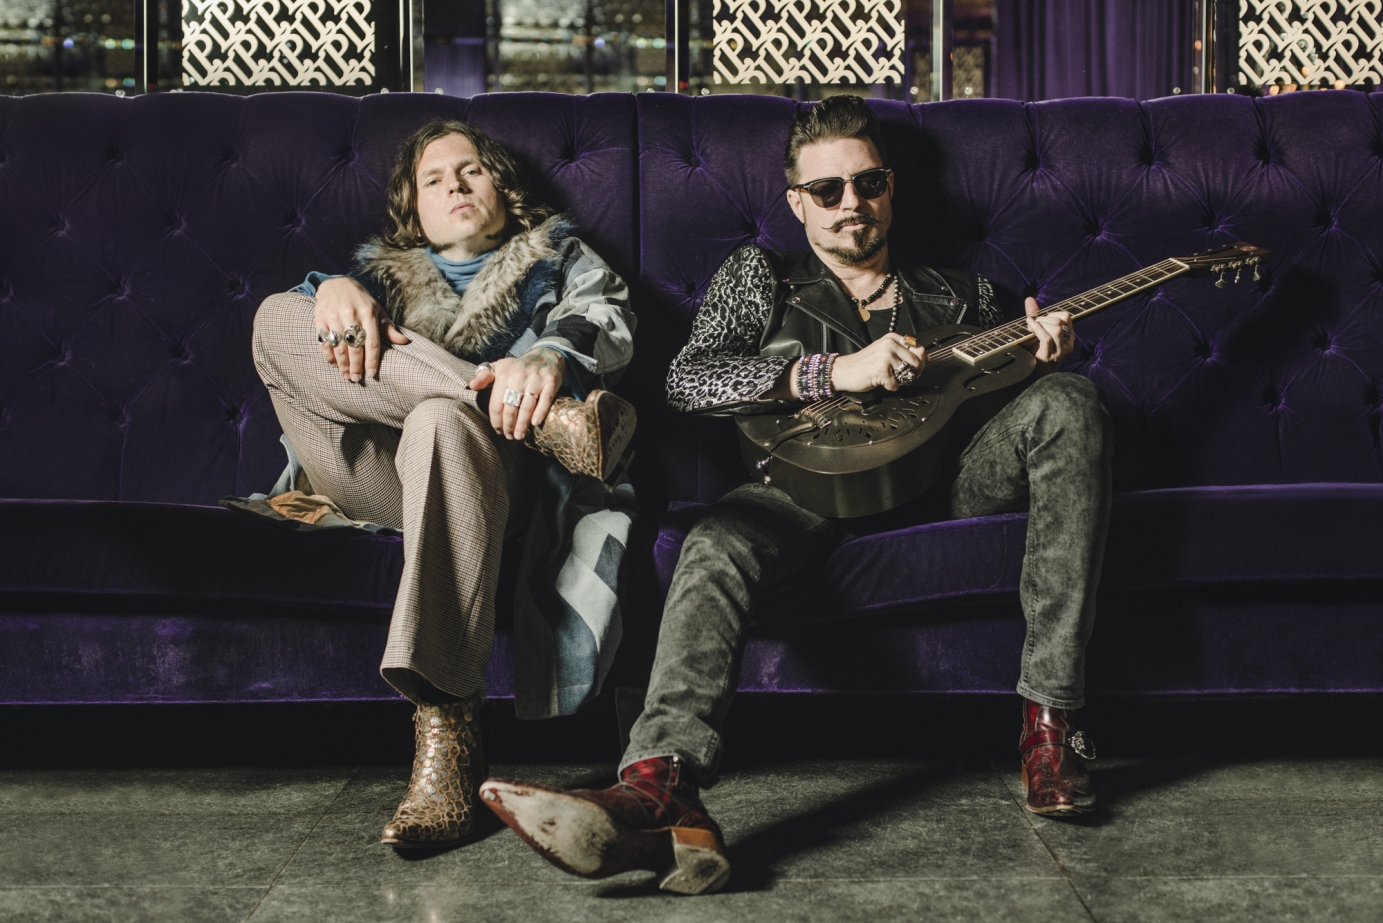 Photography for Rival Sons by Eleanor Jane